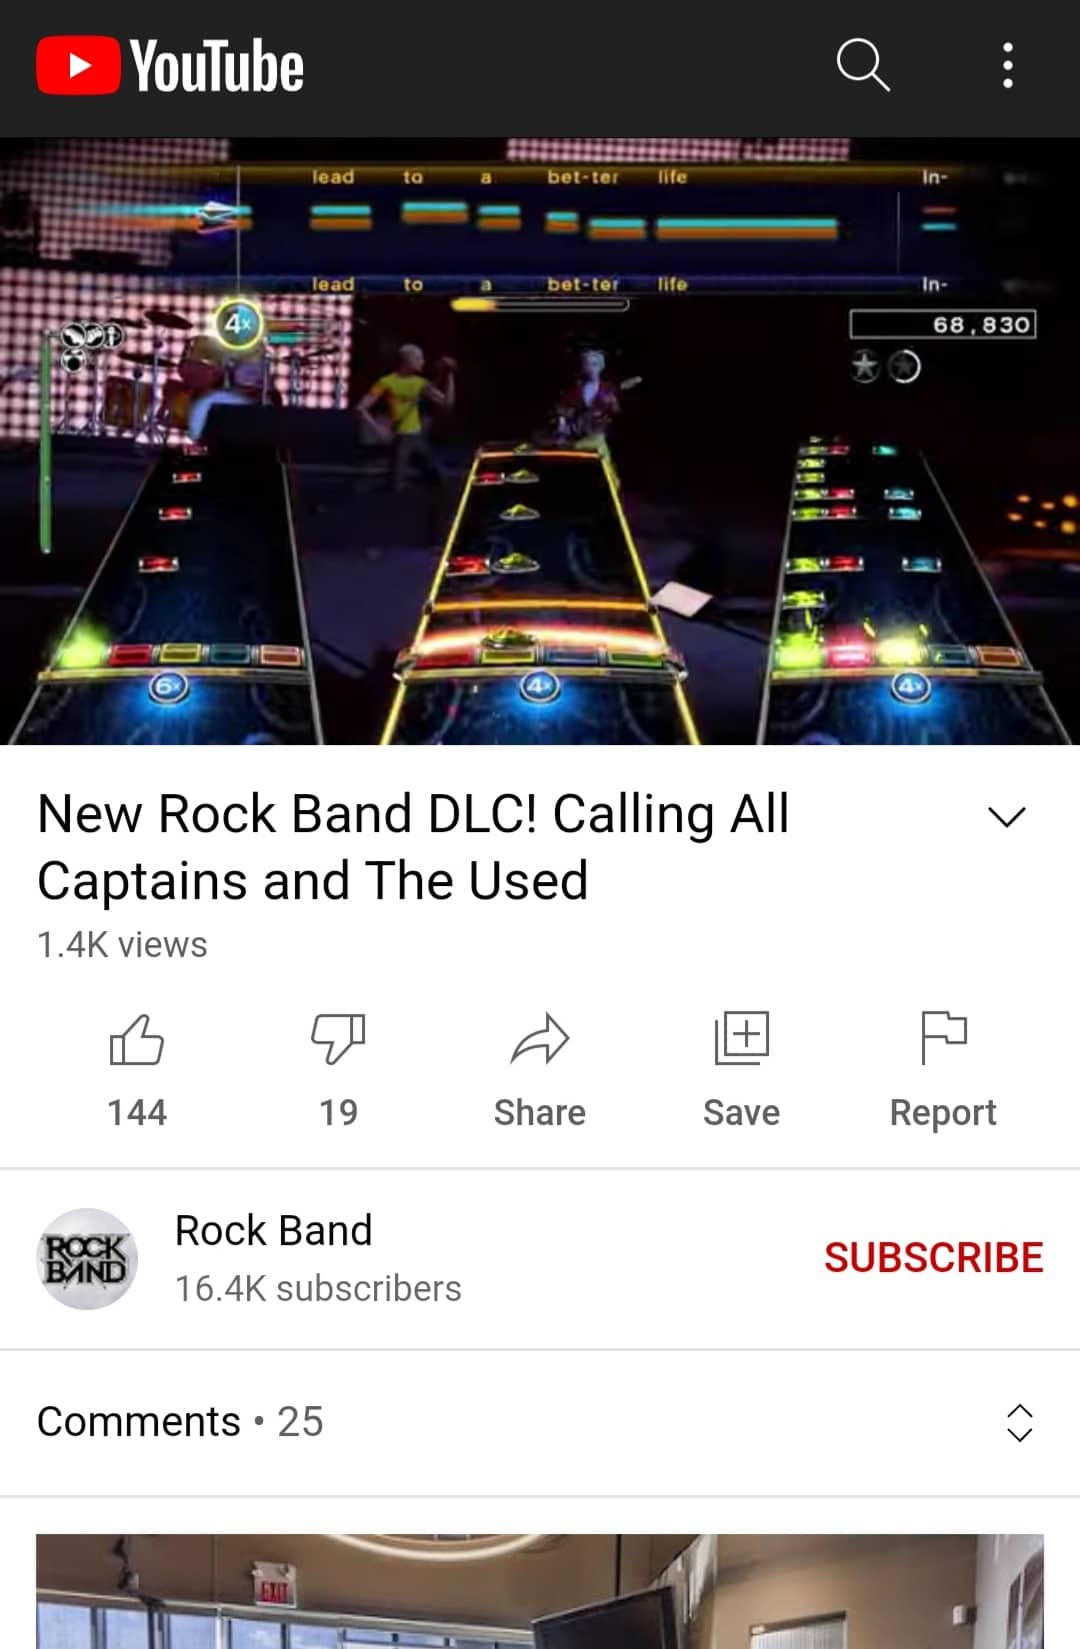 Calling All Captains on Rock Band